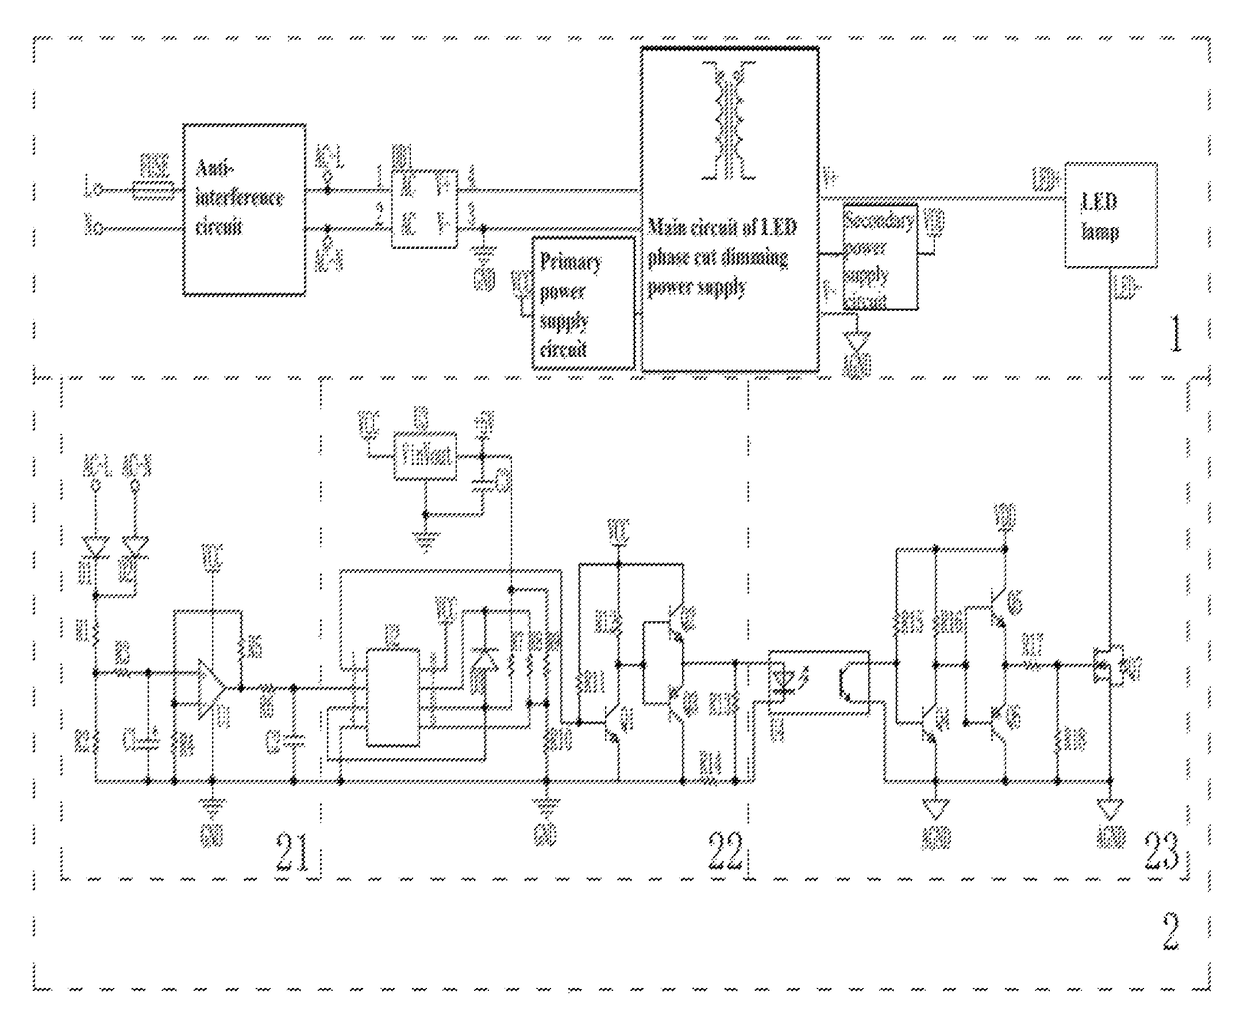 Kind of pulse width dimming control circuit for LED phase cut dimming power supply